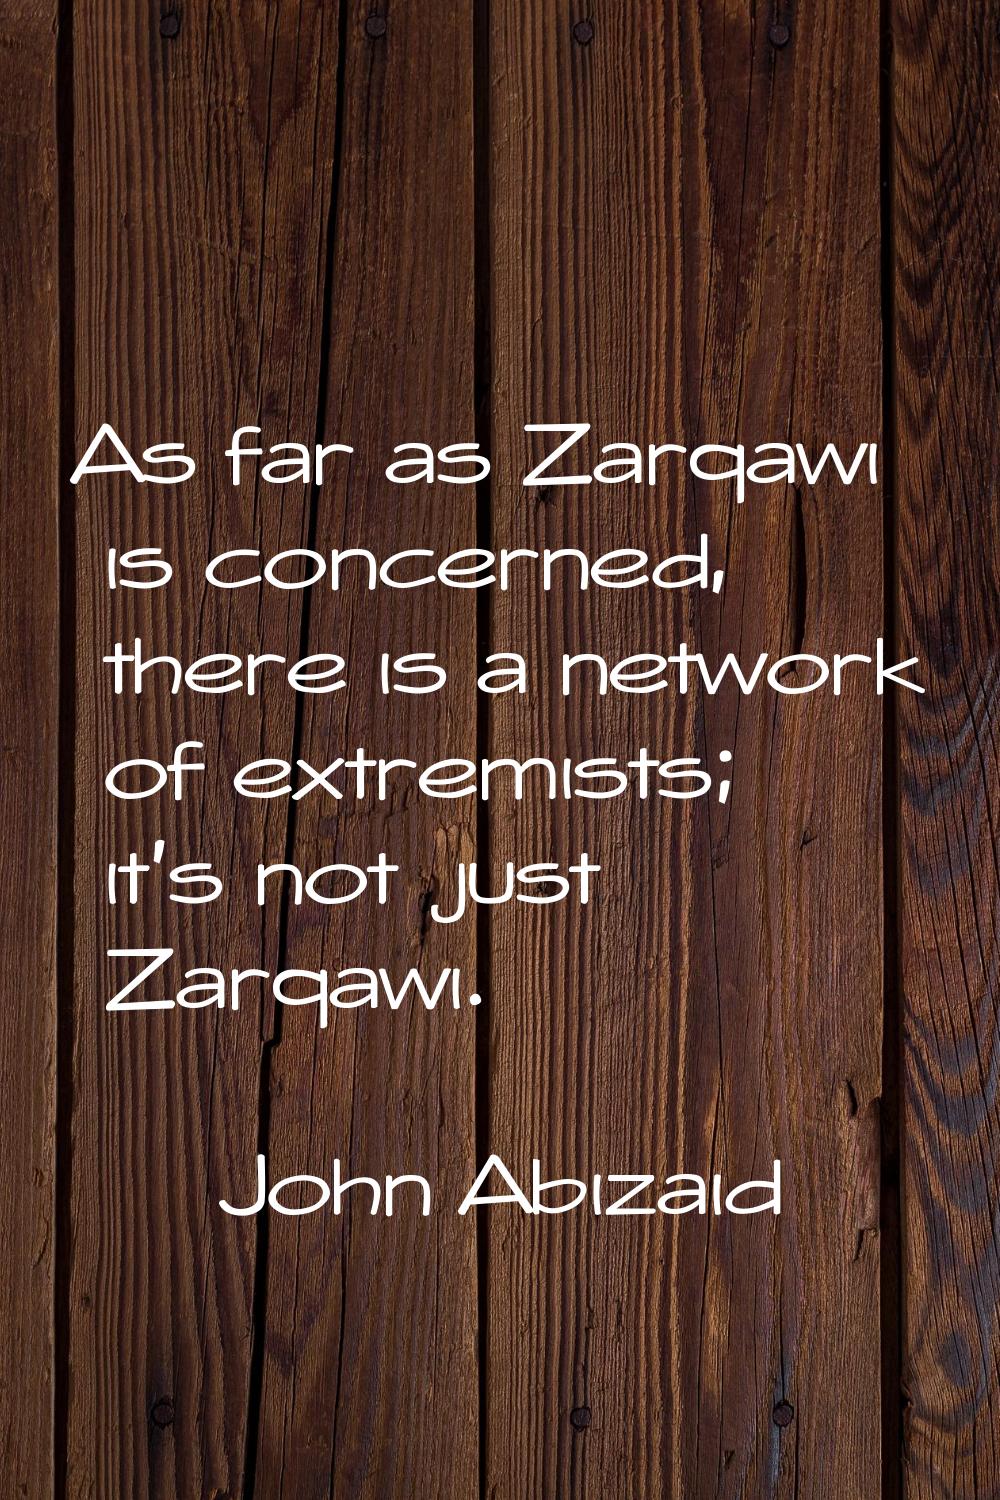 As far as Zarqawi is concerned, there is a network of extremists; it's not just Zarqawi.